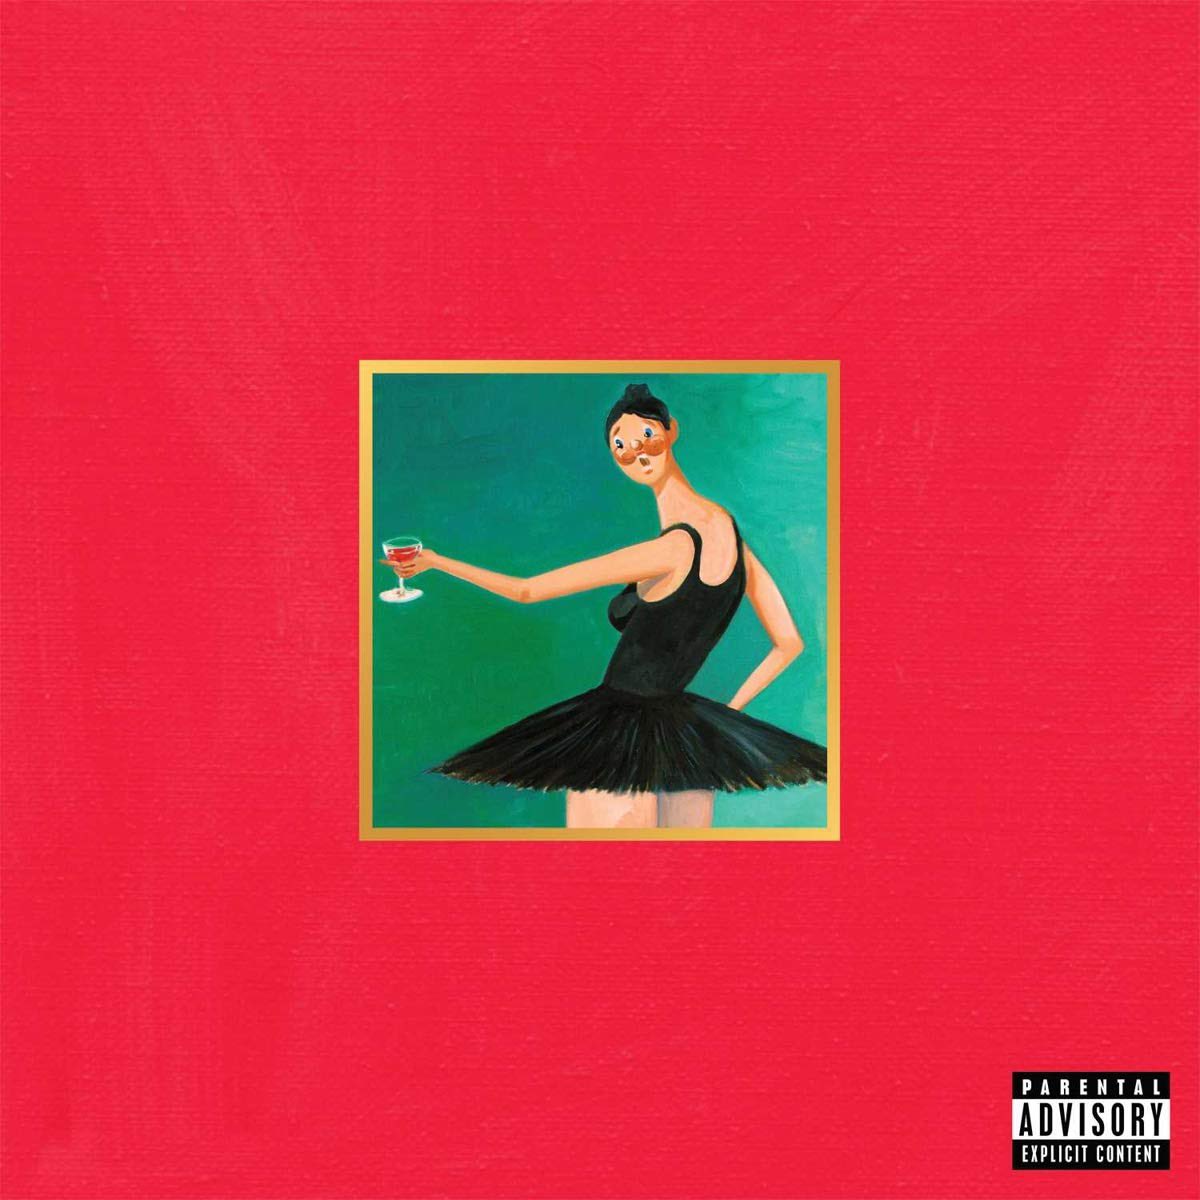 2010: My Beautiful Dark Twisted Fantasy - Kanye West What can i say that hasnt already been said about this album.. absolute perfection. Fave tracks: Devil in a new dress, runaway, gorgeous Hm: man on the moon 2, how i got over